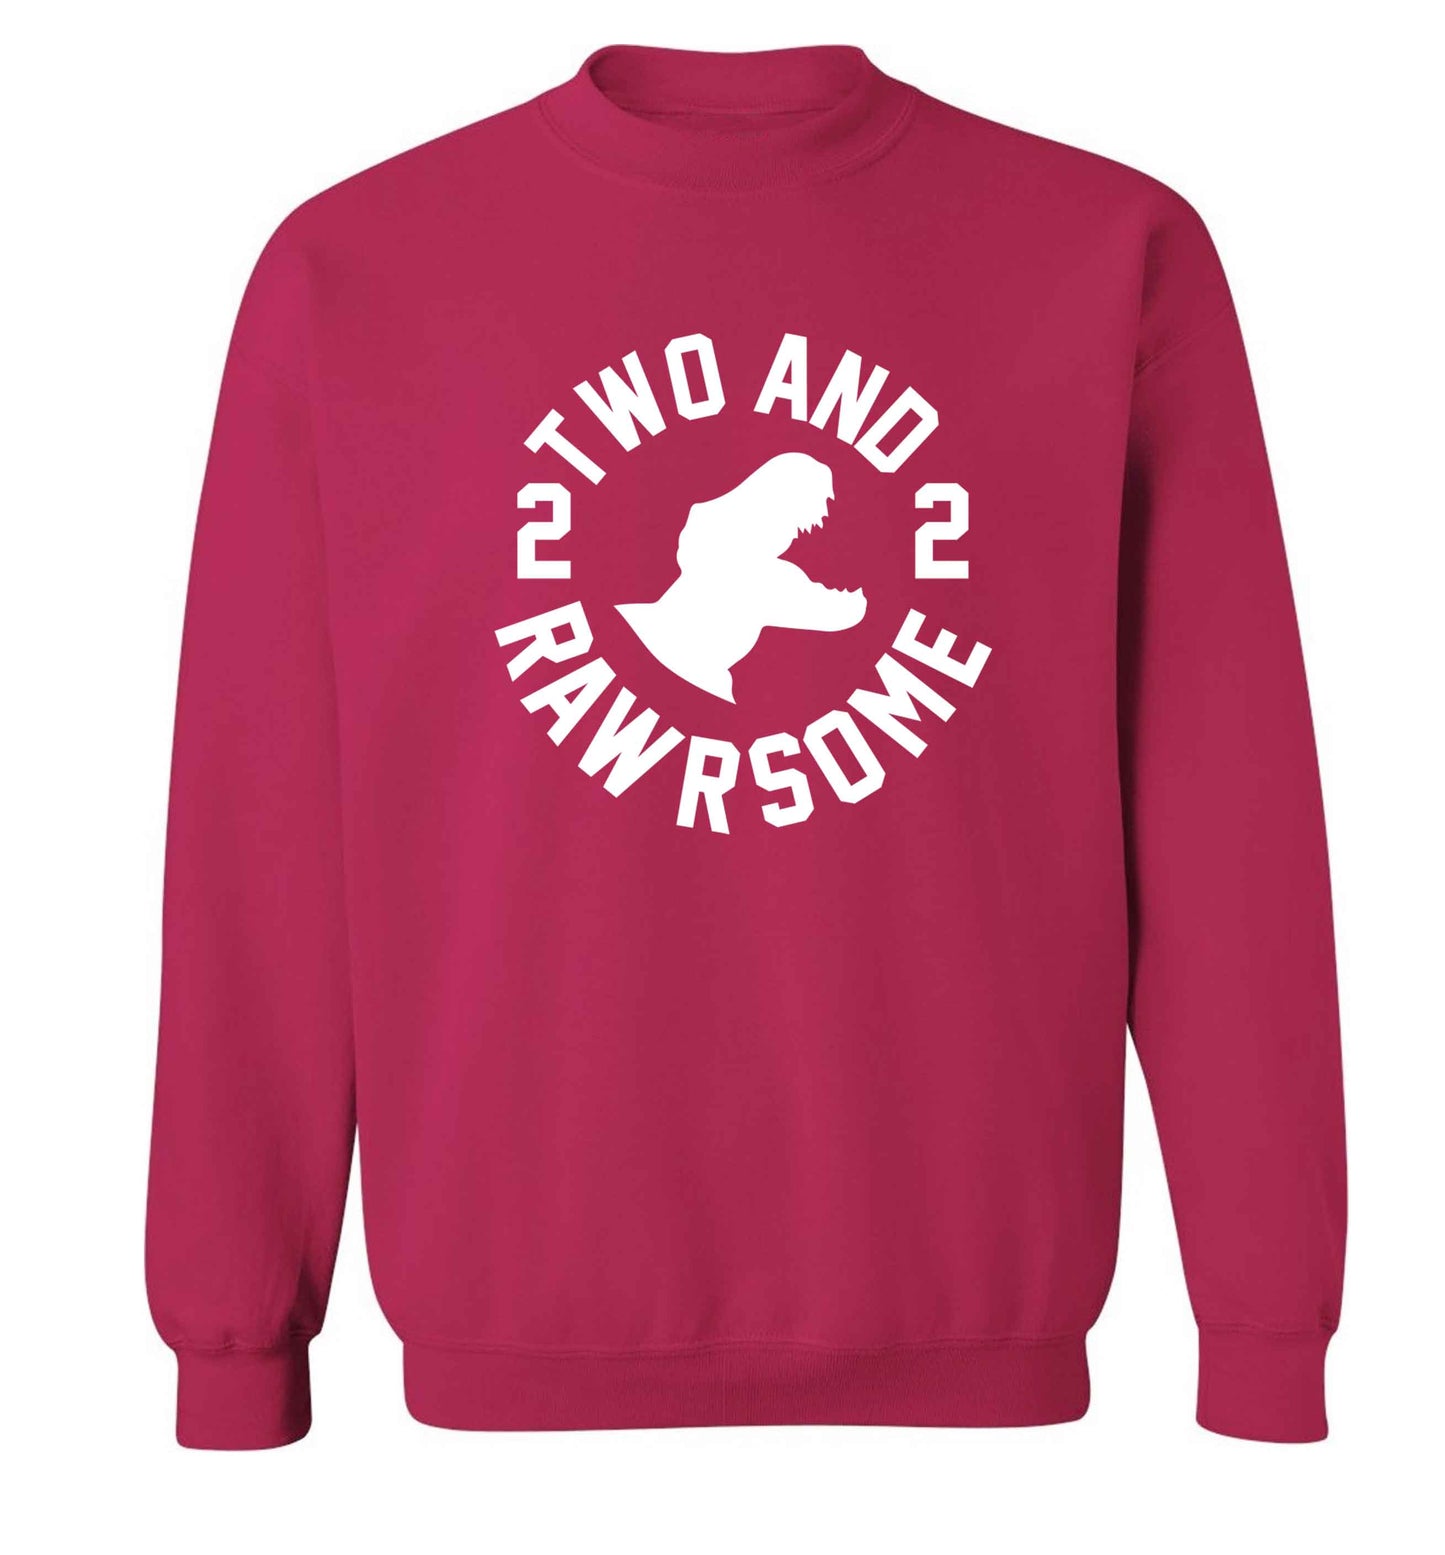 Two and rawrsome adult's unisex pink sweater 2XL